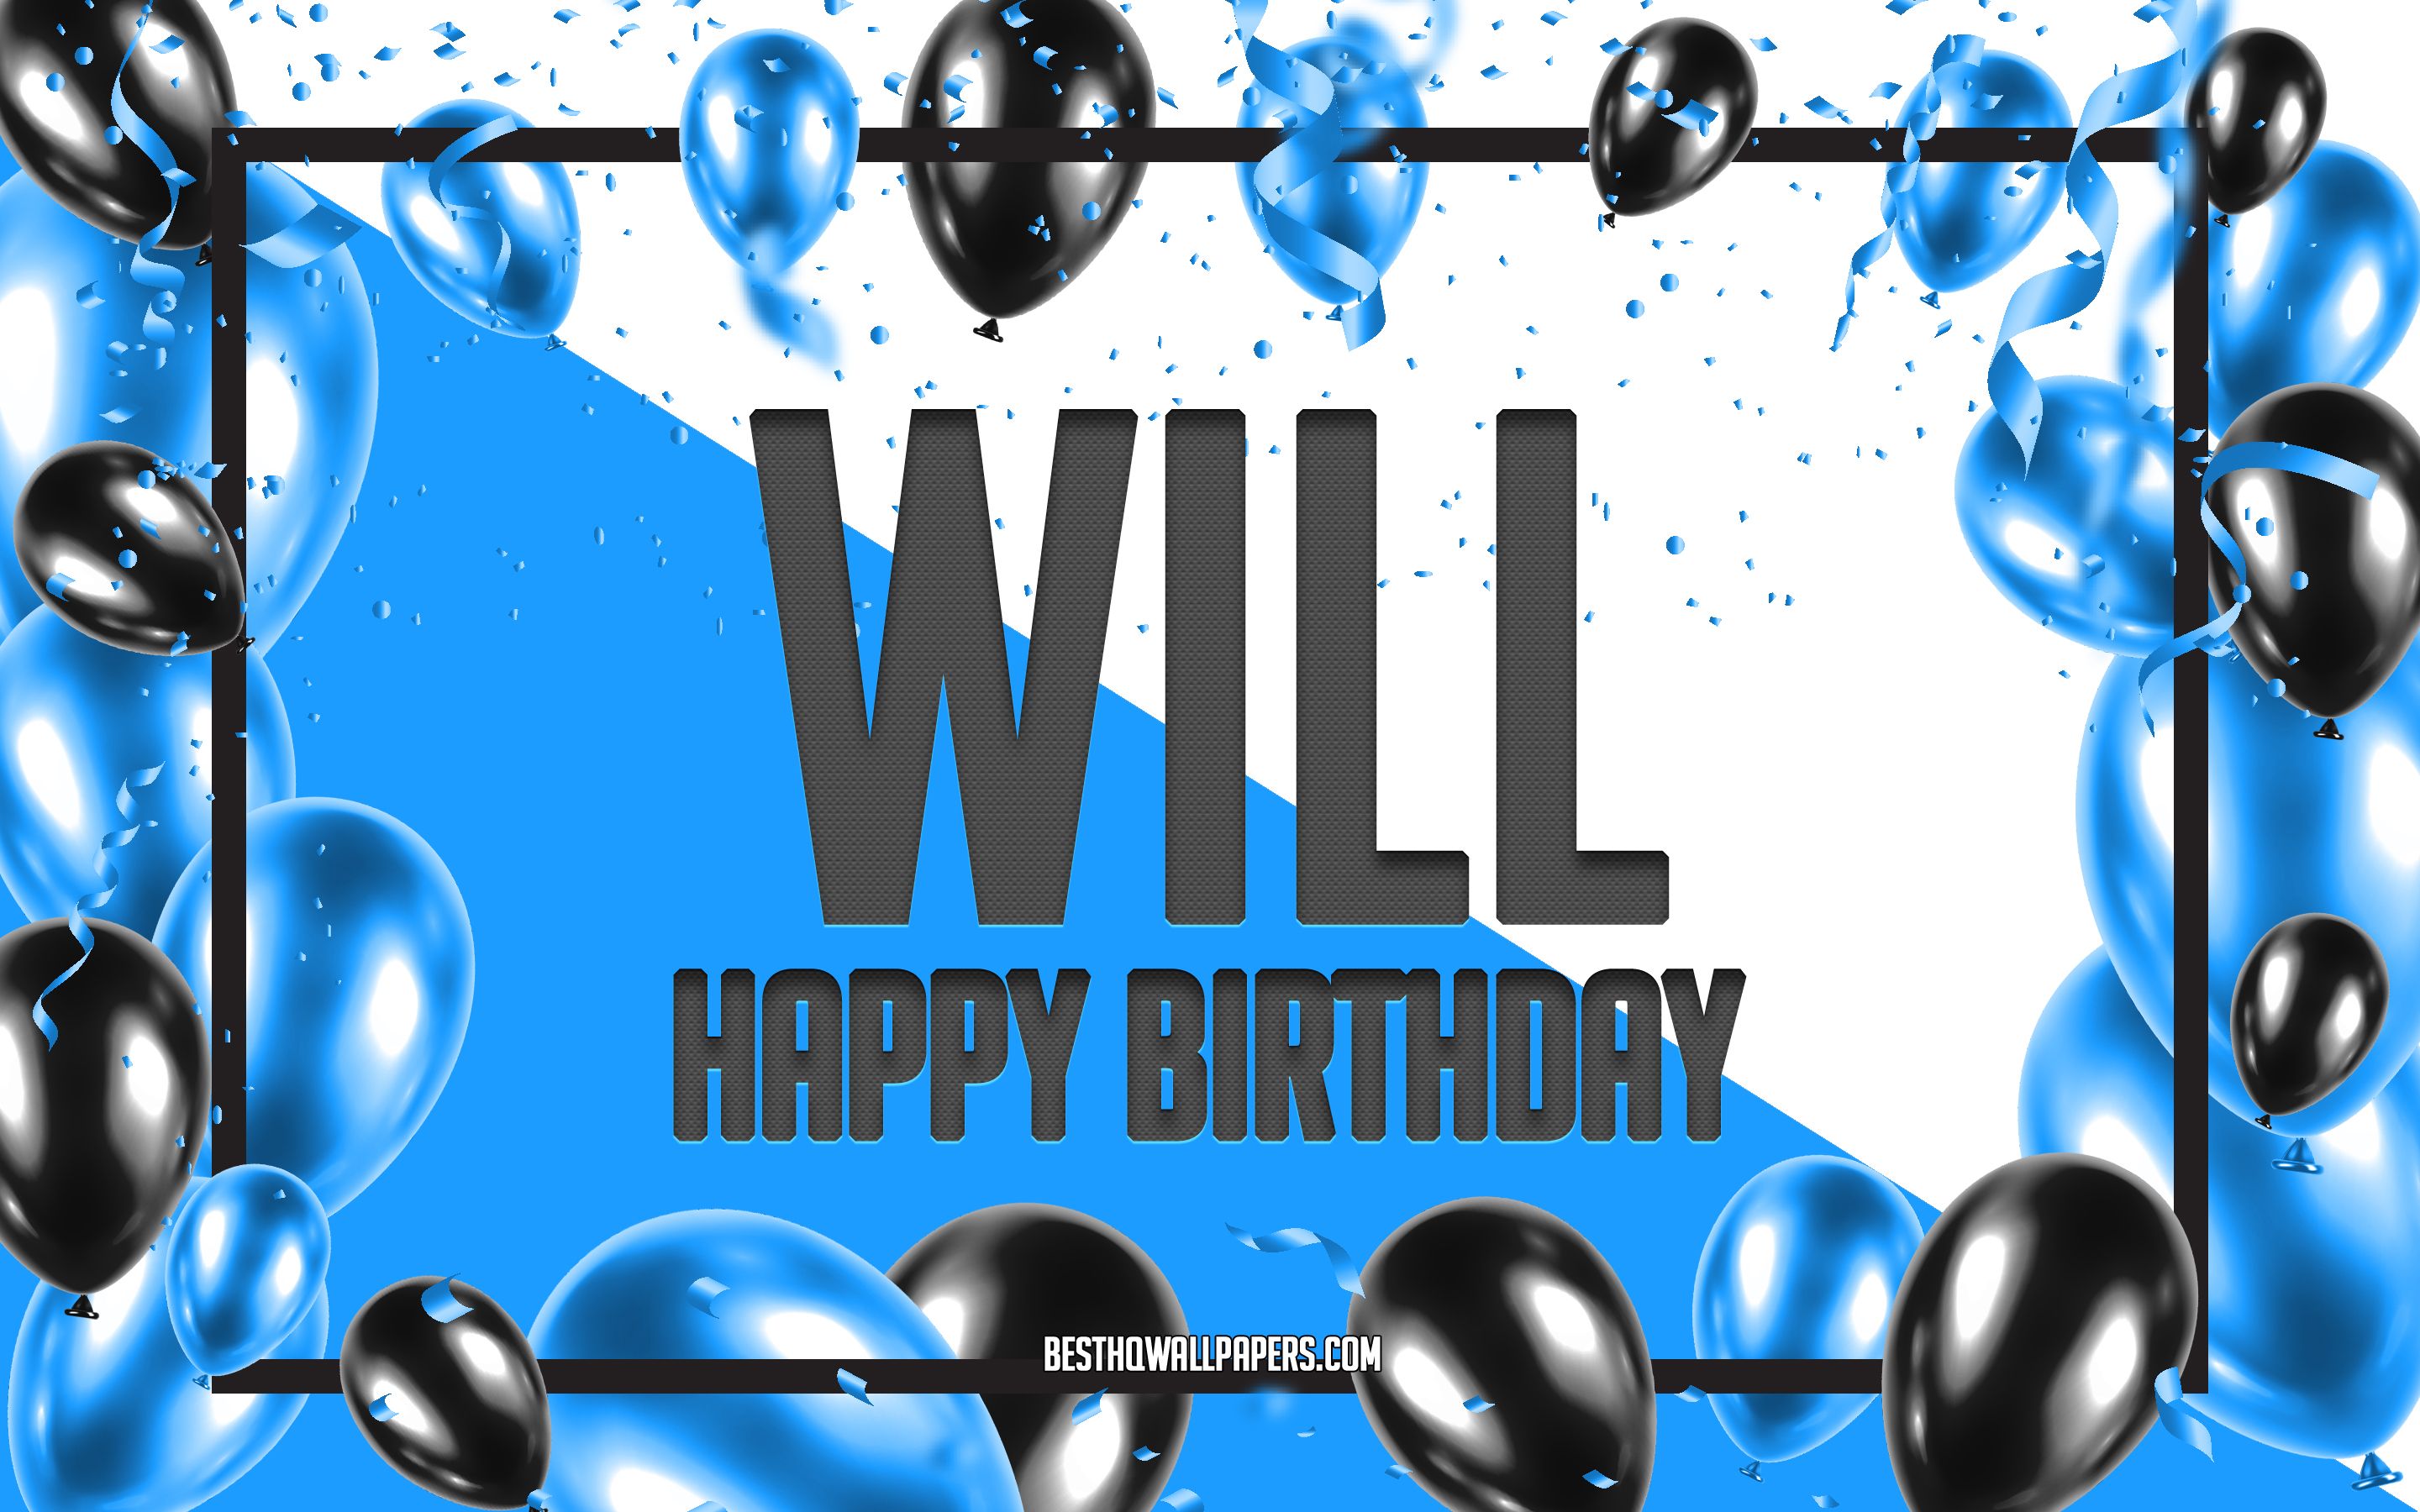 Download wallpaper Happy Birthday Will, Birthday Balloons Background, Will, wallpaper with names, Will Happy Birthday, Blue Balloons Birthday Background, Will Birthday for desktop with resolution 2880x1800. High Quality HD picture wallpaper